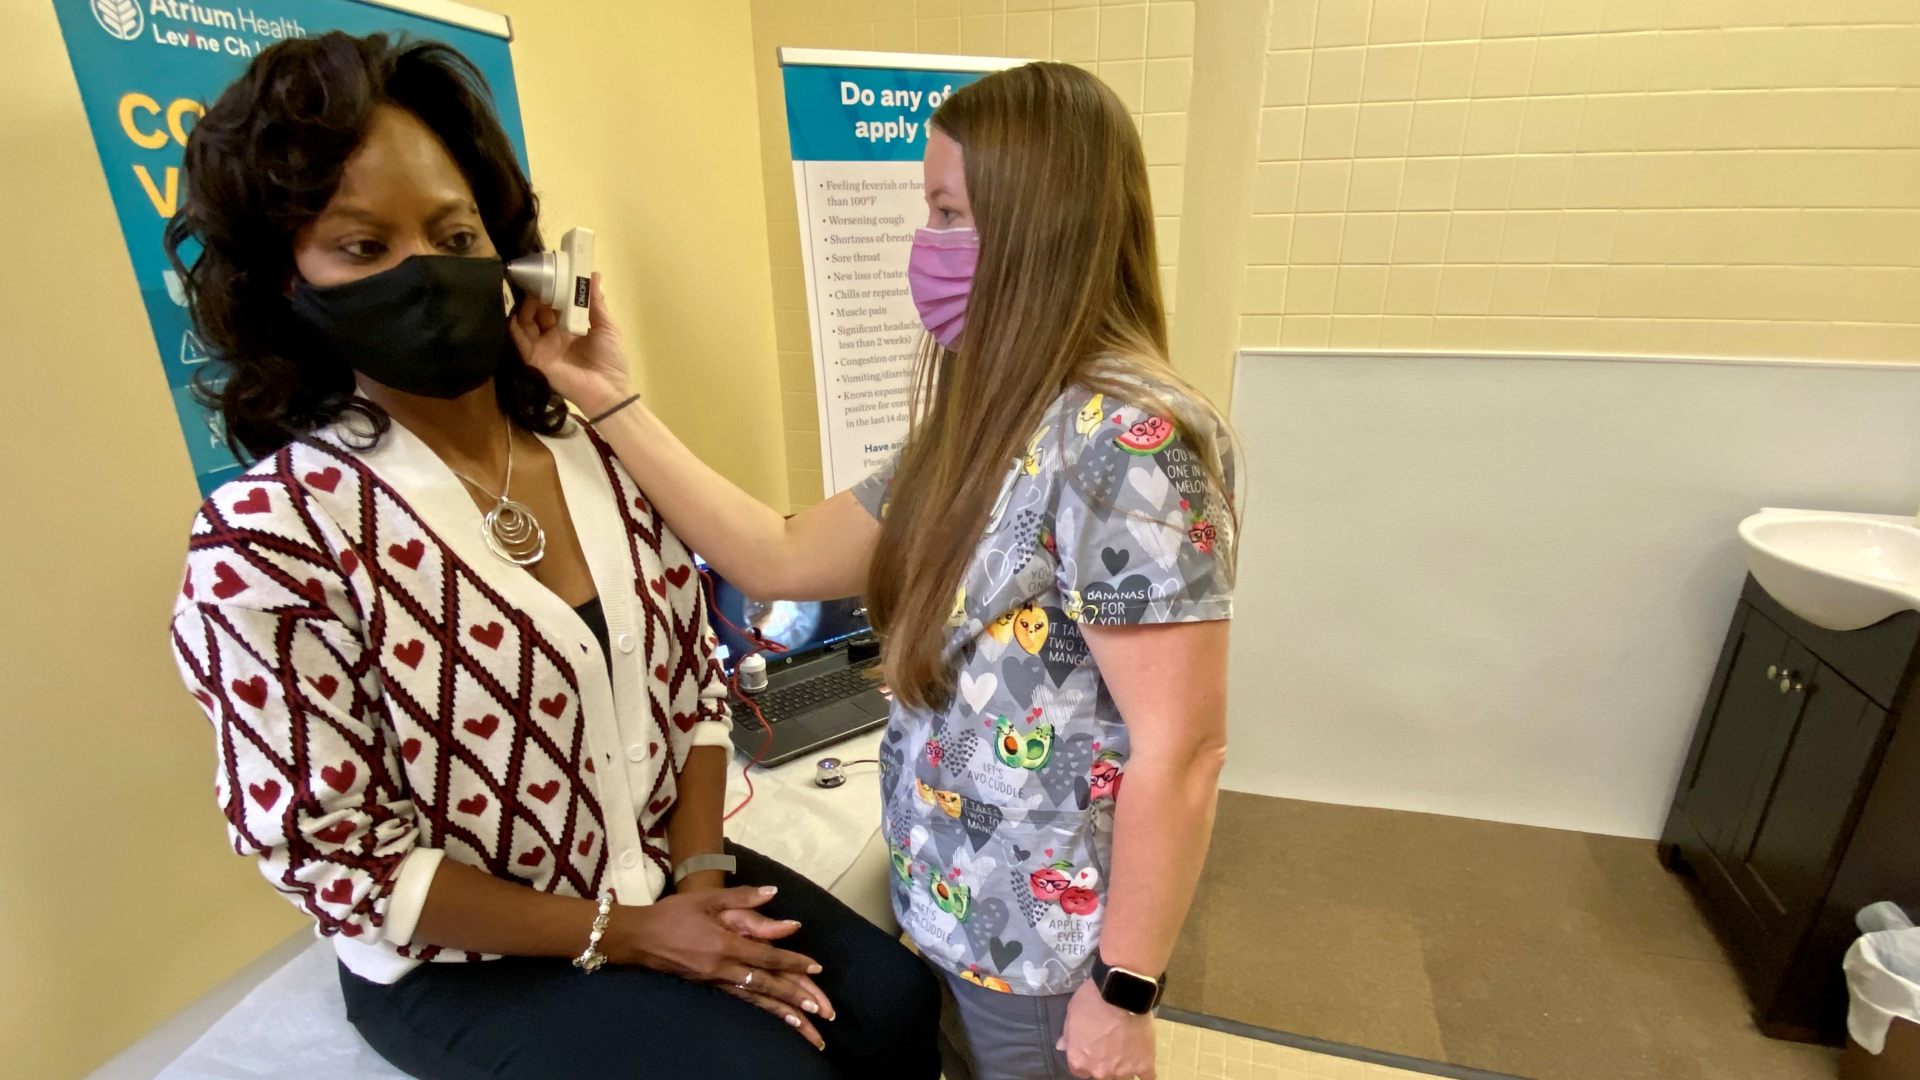 Atrium Health is bringing community-based virtual care to the area with the creation of a new clinic at Mt. Calvary Baptist Church’s Community Life Center’s Robertsdale Campus.